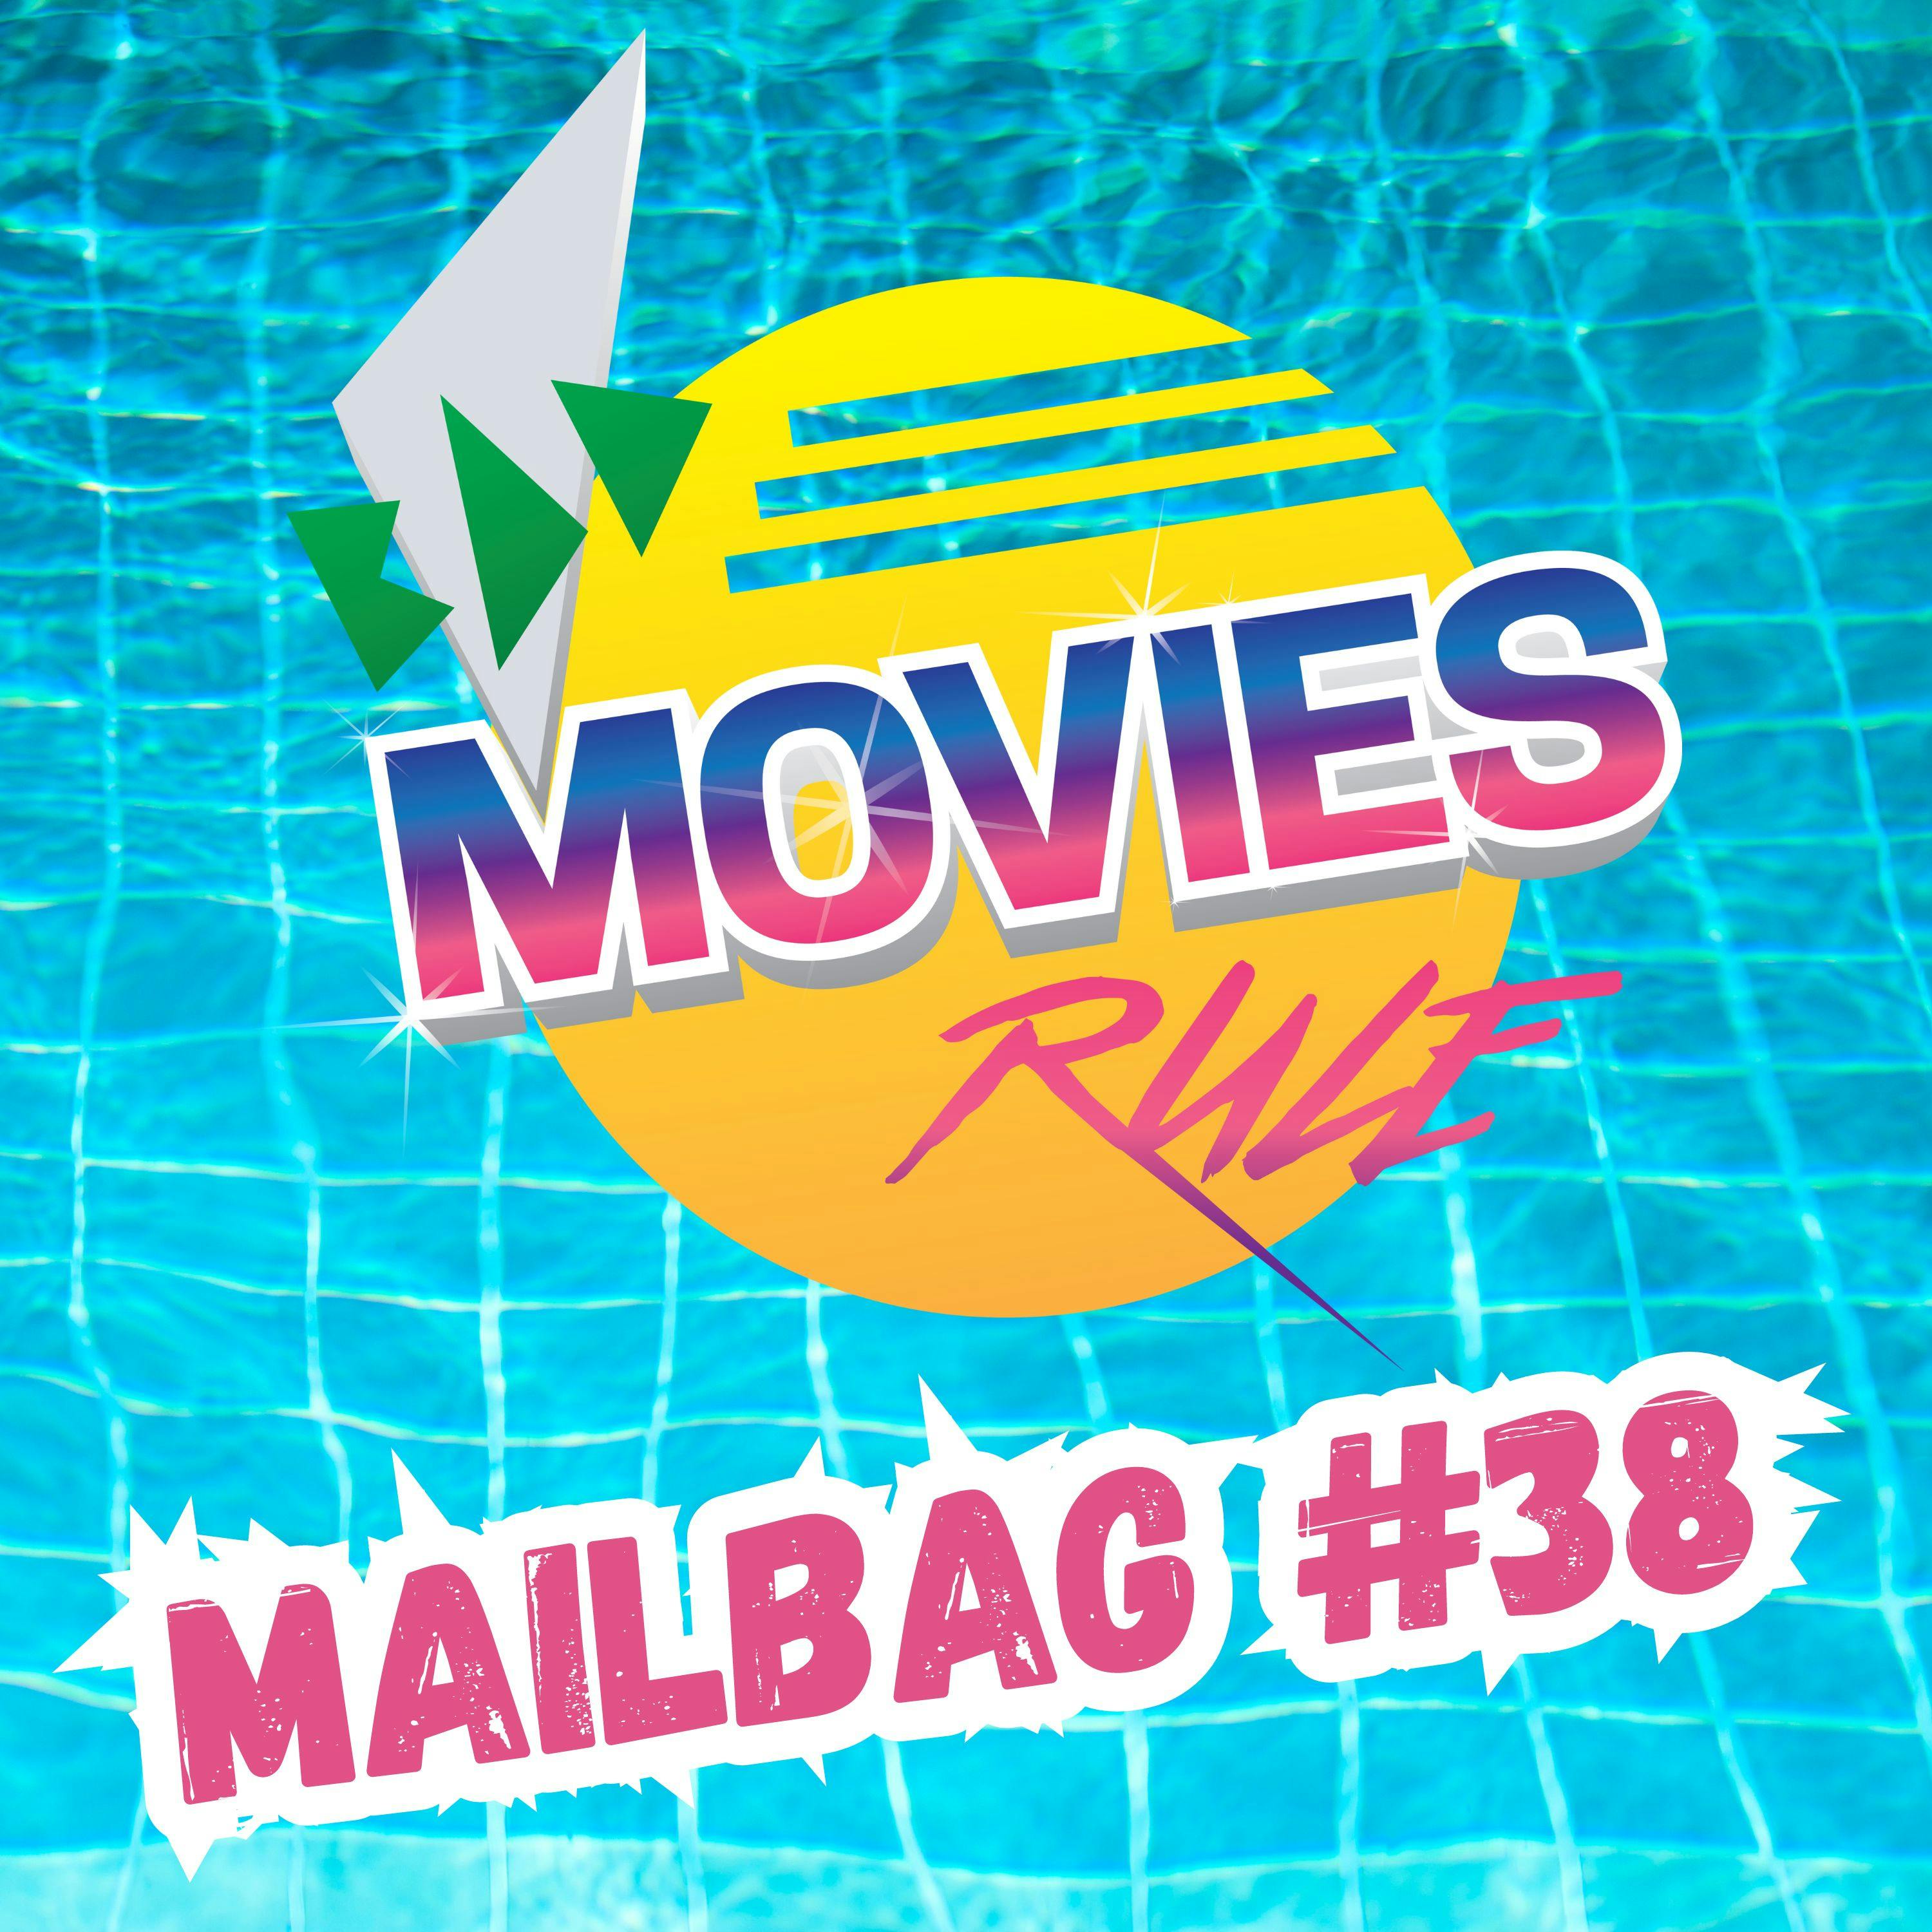 Mailbag #38 - Say Hi to Your Mother For Me, Okay?